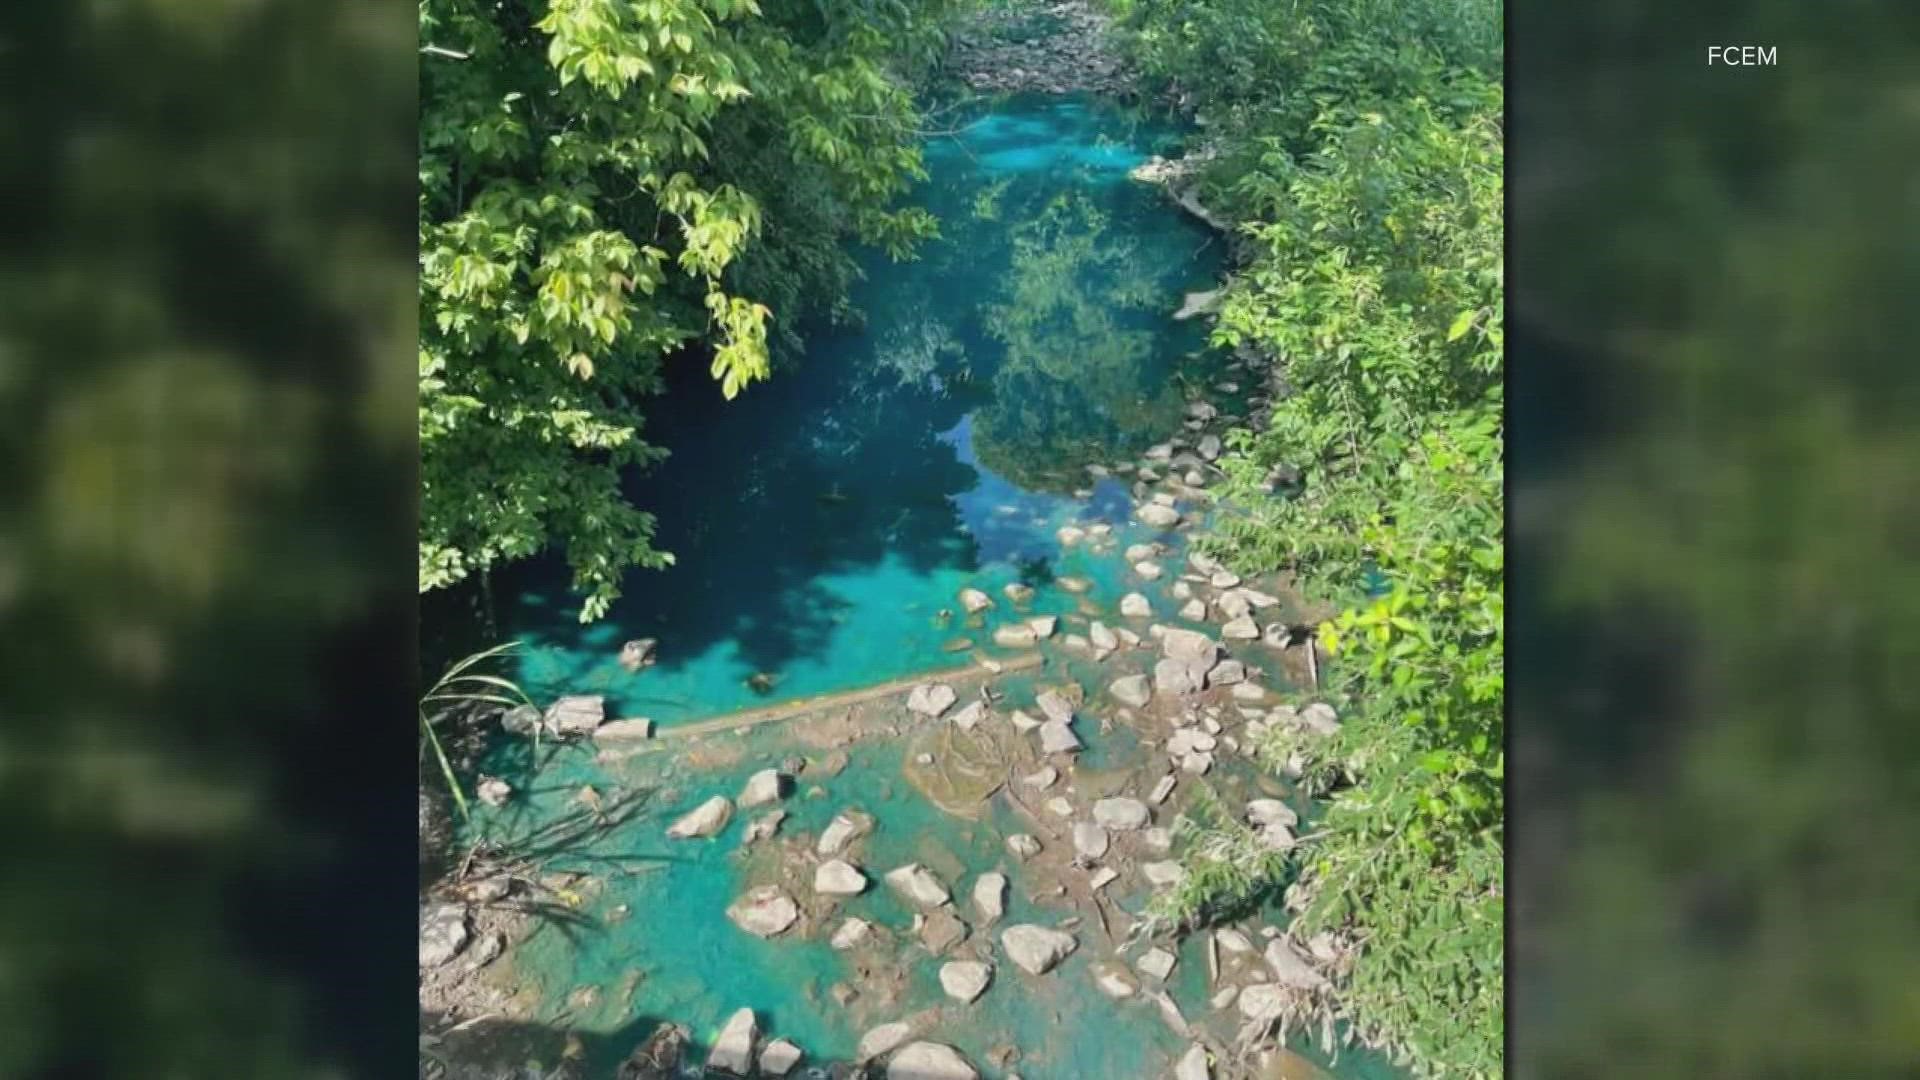 Fall Run Creek in New Albany, Ind. was bright blue allegedly due to a chemical spill. Floyd County Emergency Management says no aquatic life was harmed by the spill.